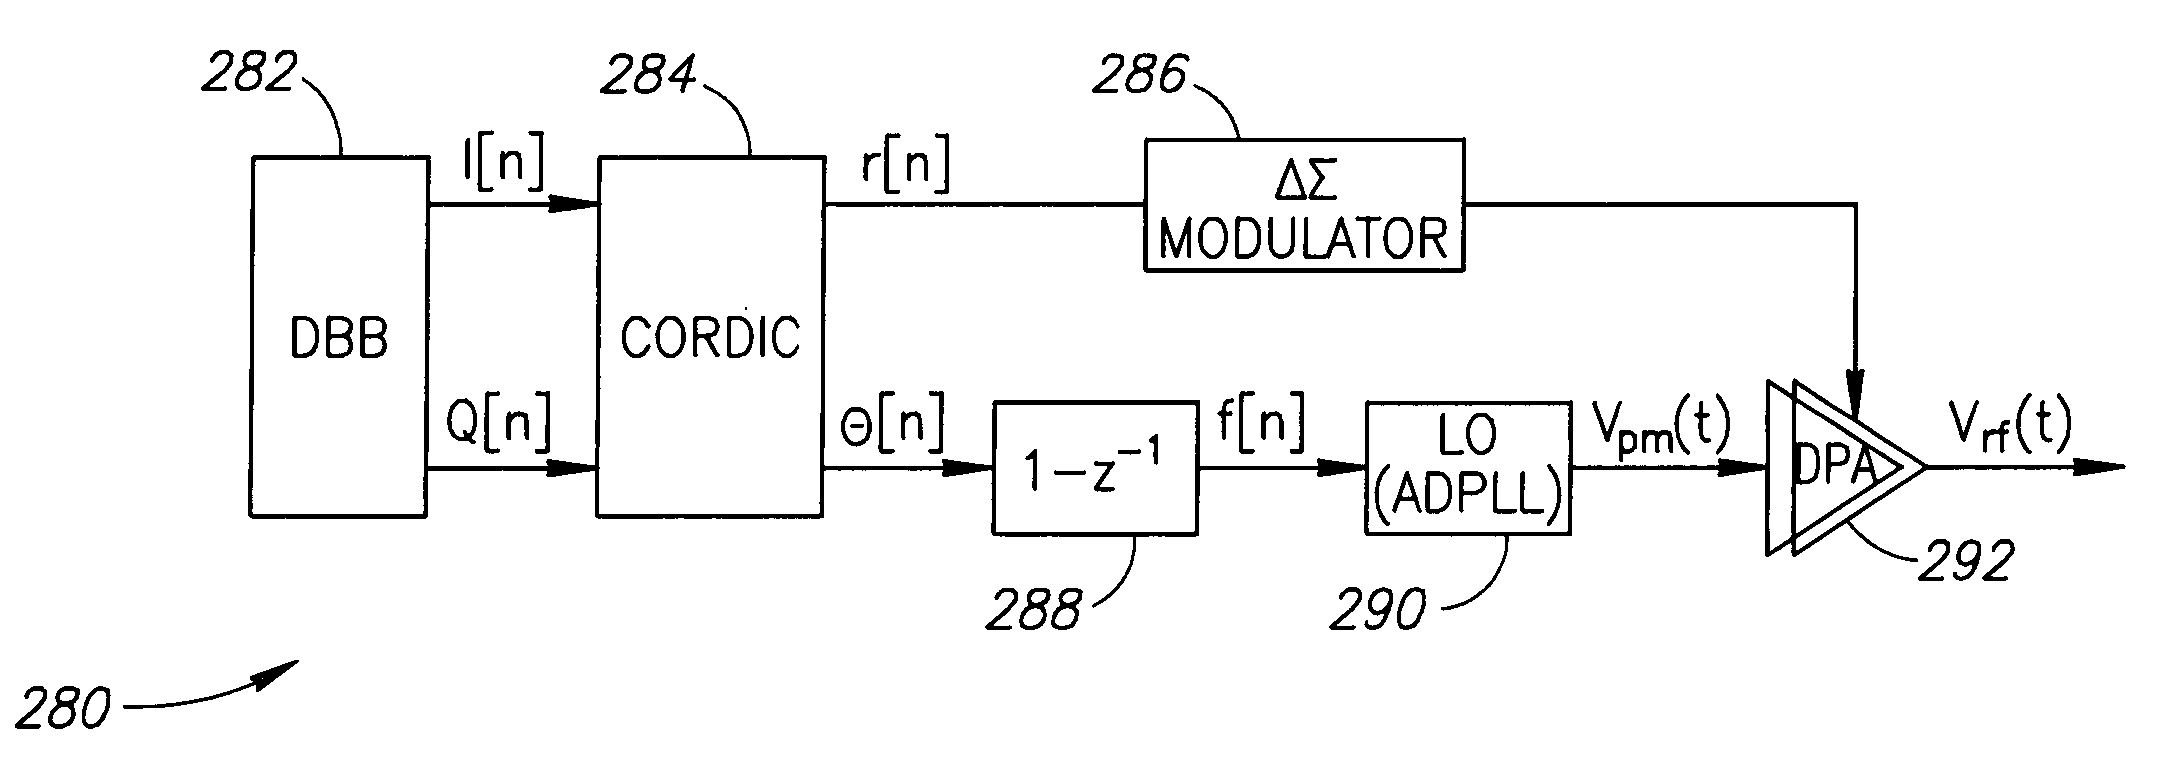 Transmitter for wireless applications incorporation spectral emission shaping sigma delta modulator